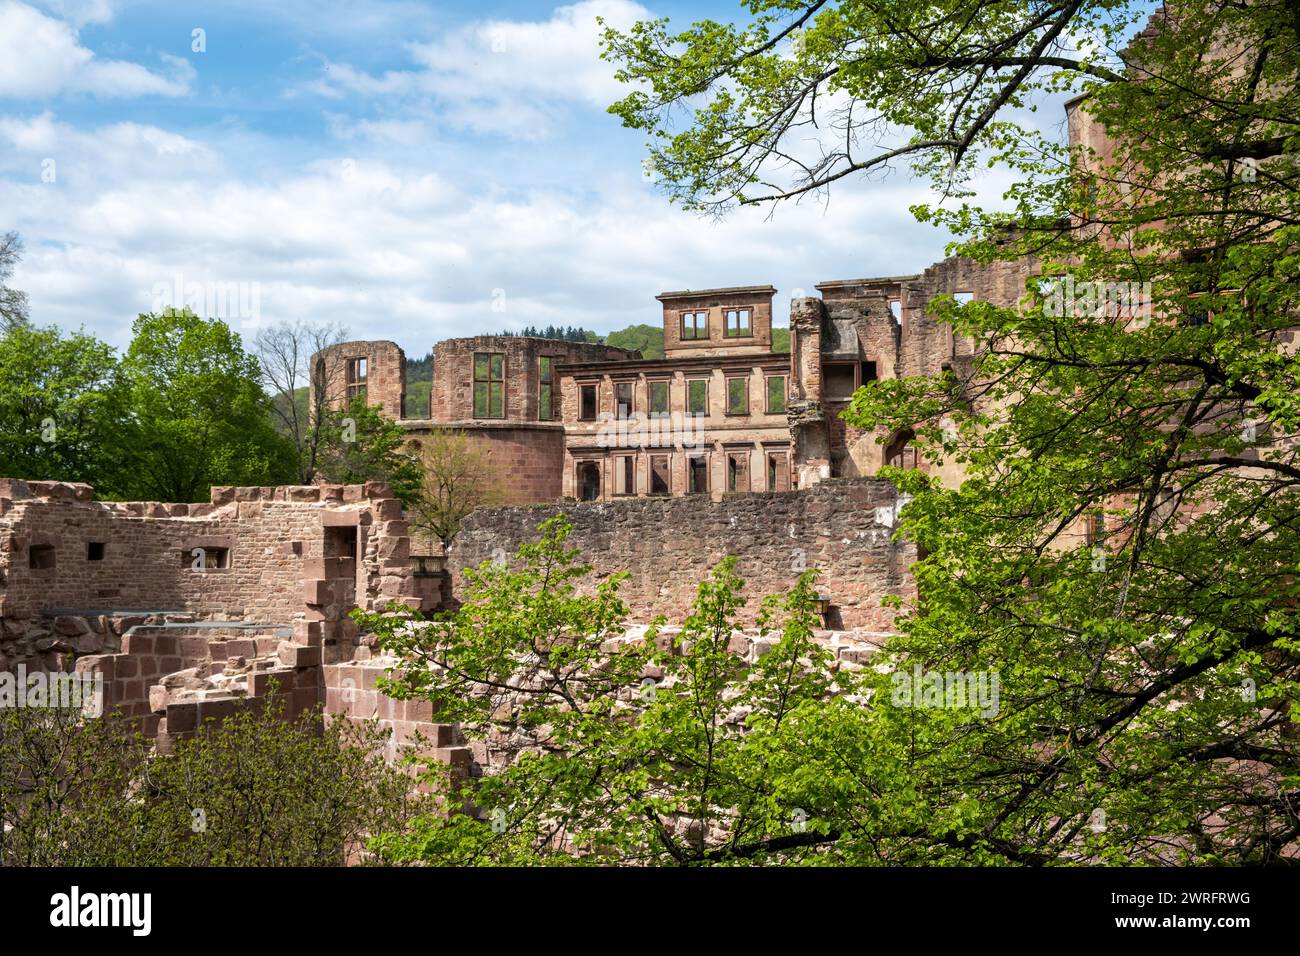 Schloss Heidelberg, Heidelberg castle, palace in Baden-Wurttemberg Germany. Ancient medieval ruins, popular sightseeing, nature, cloudy sky. Stock Photo